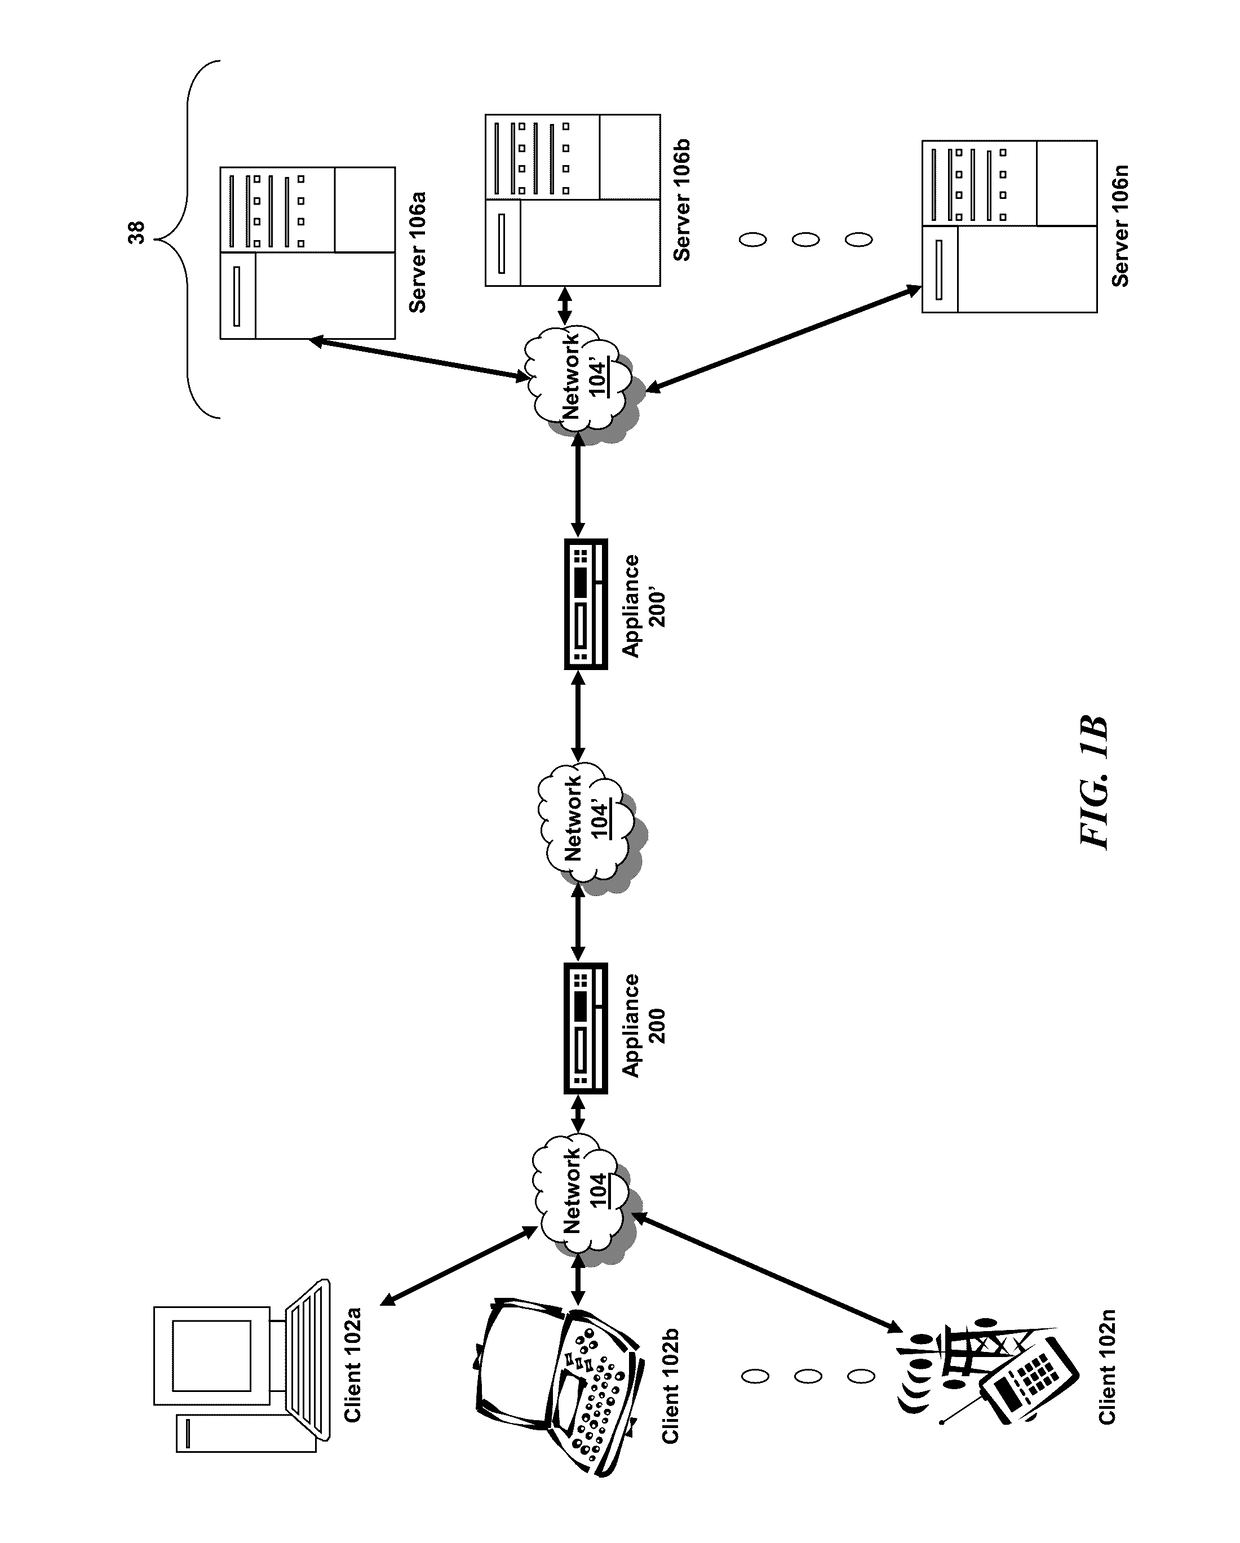 Systems and methods to support vxlan in partition environment where a single system acts as multiple logical systems to support multitenancy